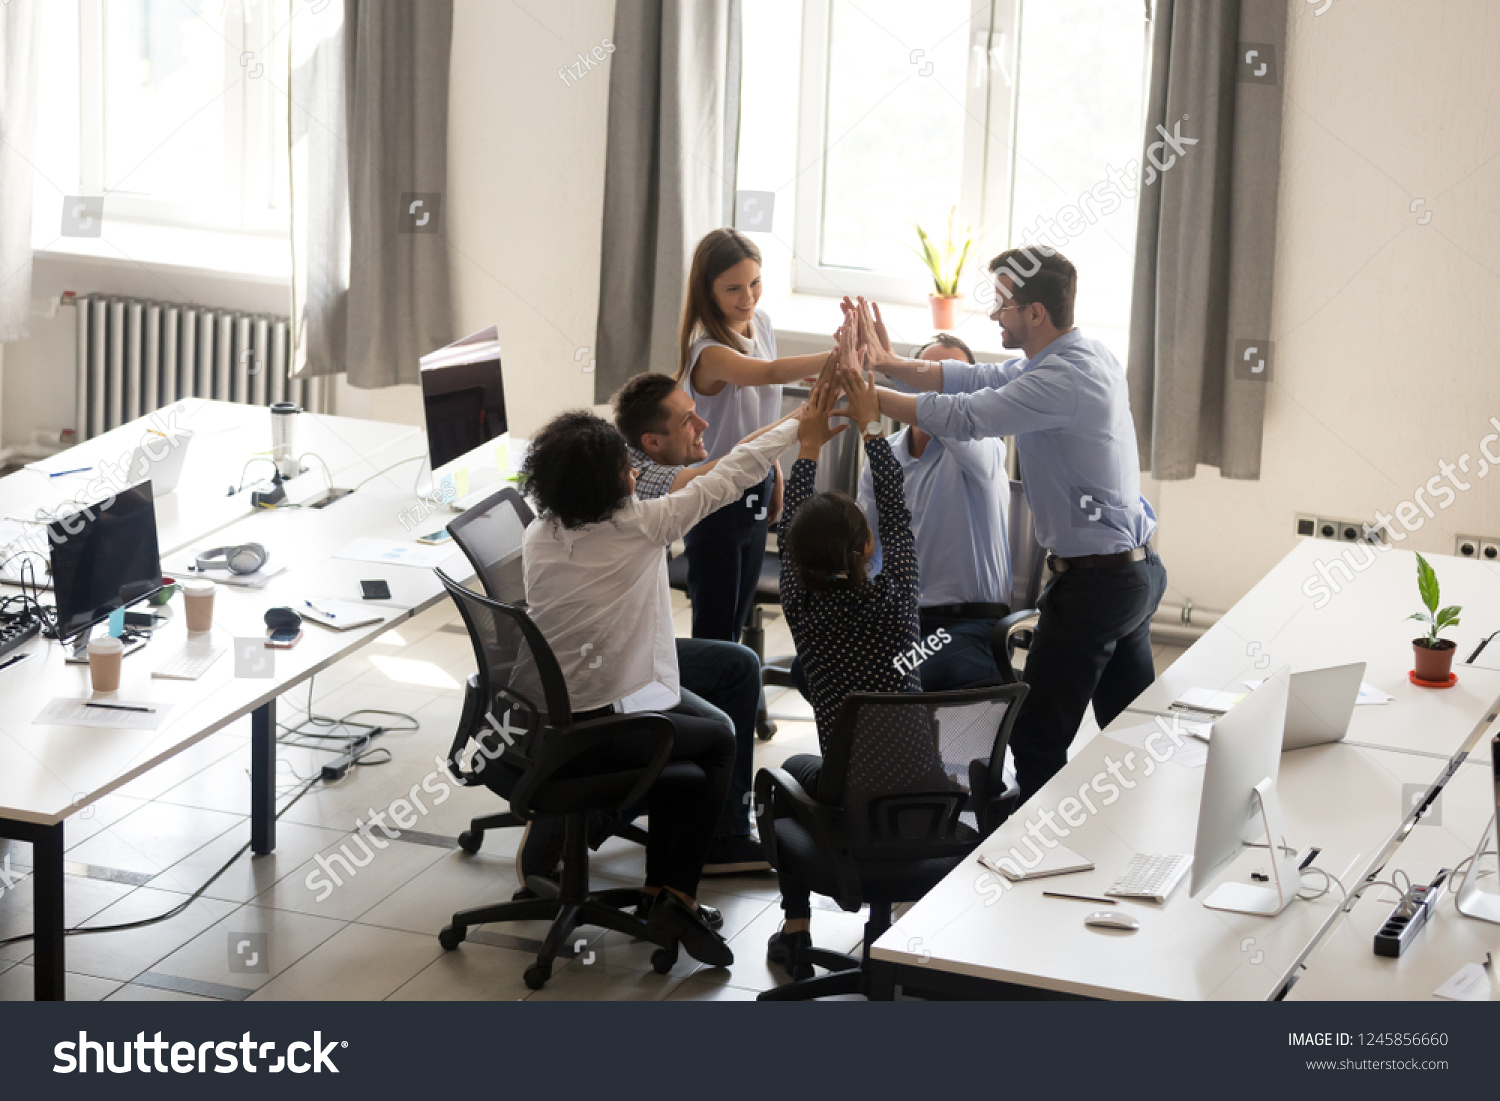 Excited multiracial office workers team giving high five together, celebrating successful teamwork results, involved in team building activity, good corporate relations, motivated by success #1245856660